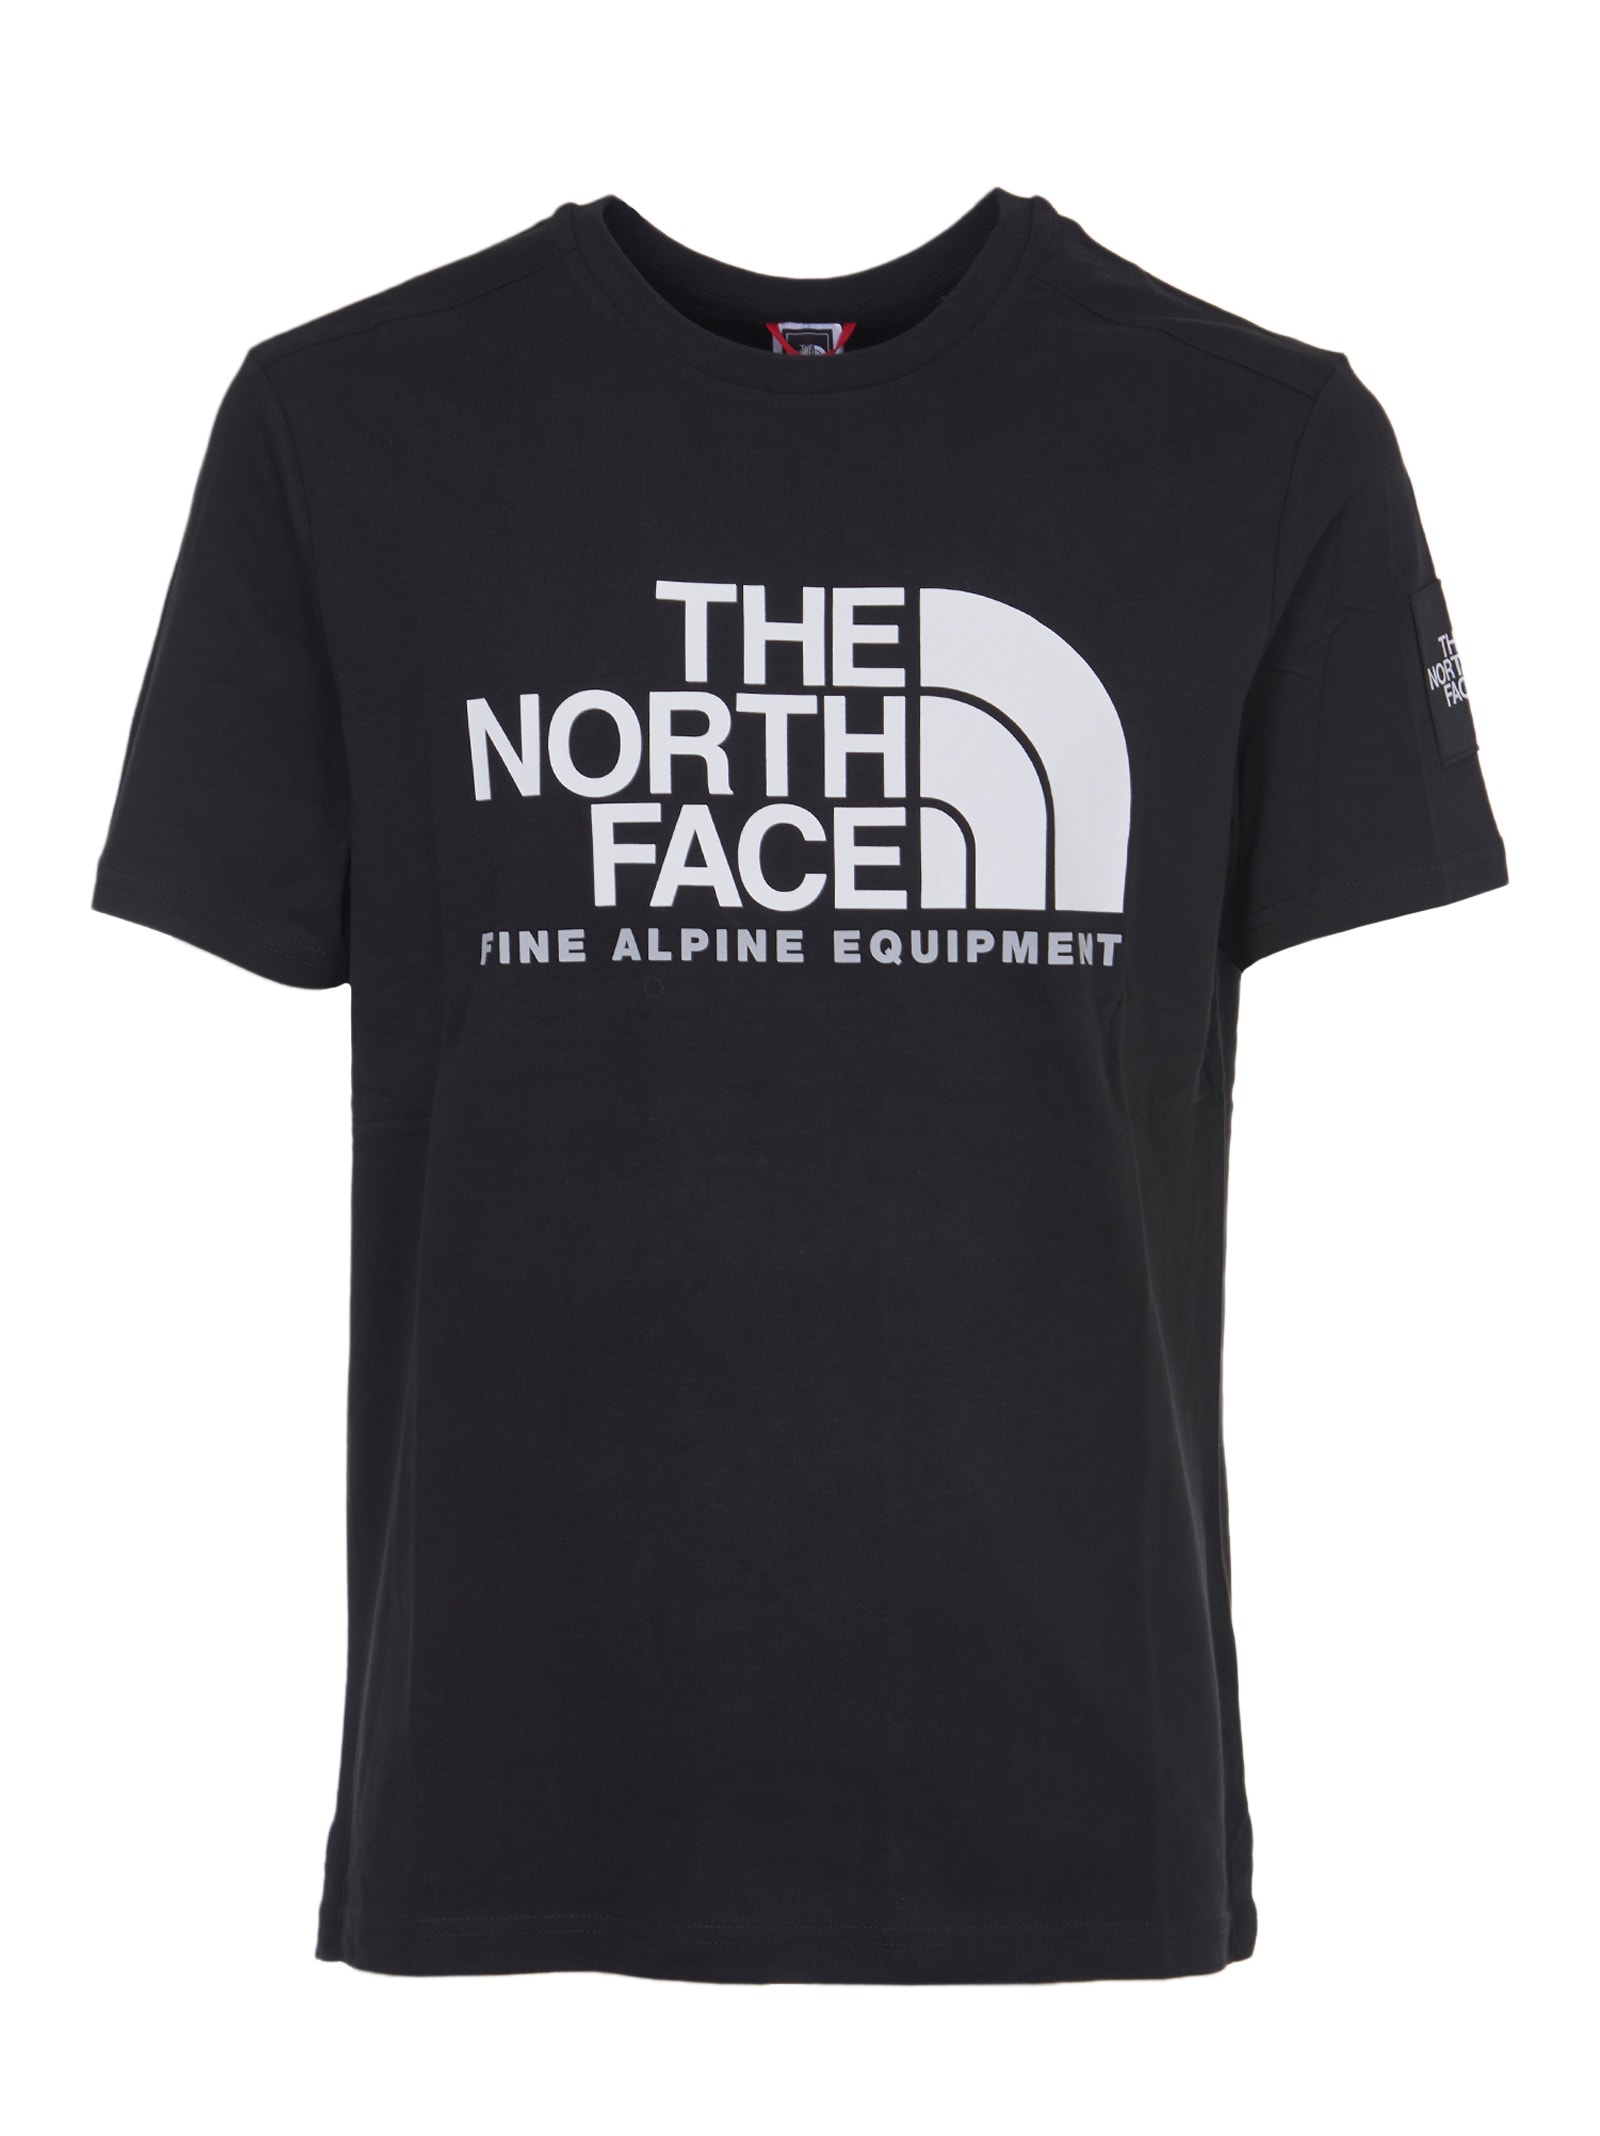 The North Face Black T-shirt never Stop Exploring